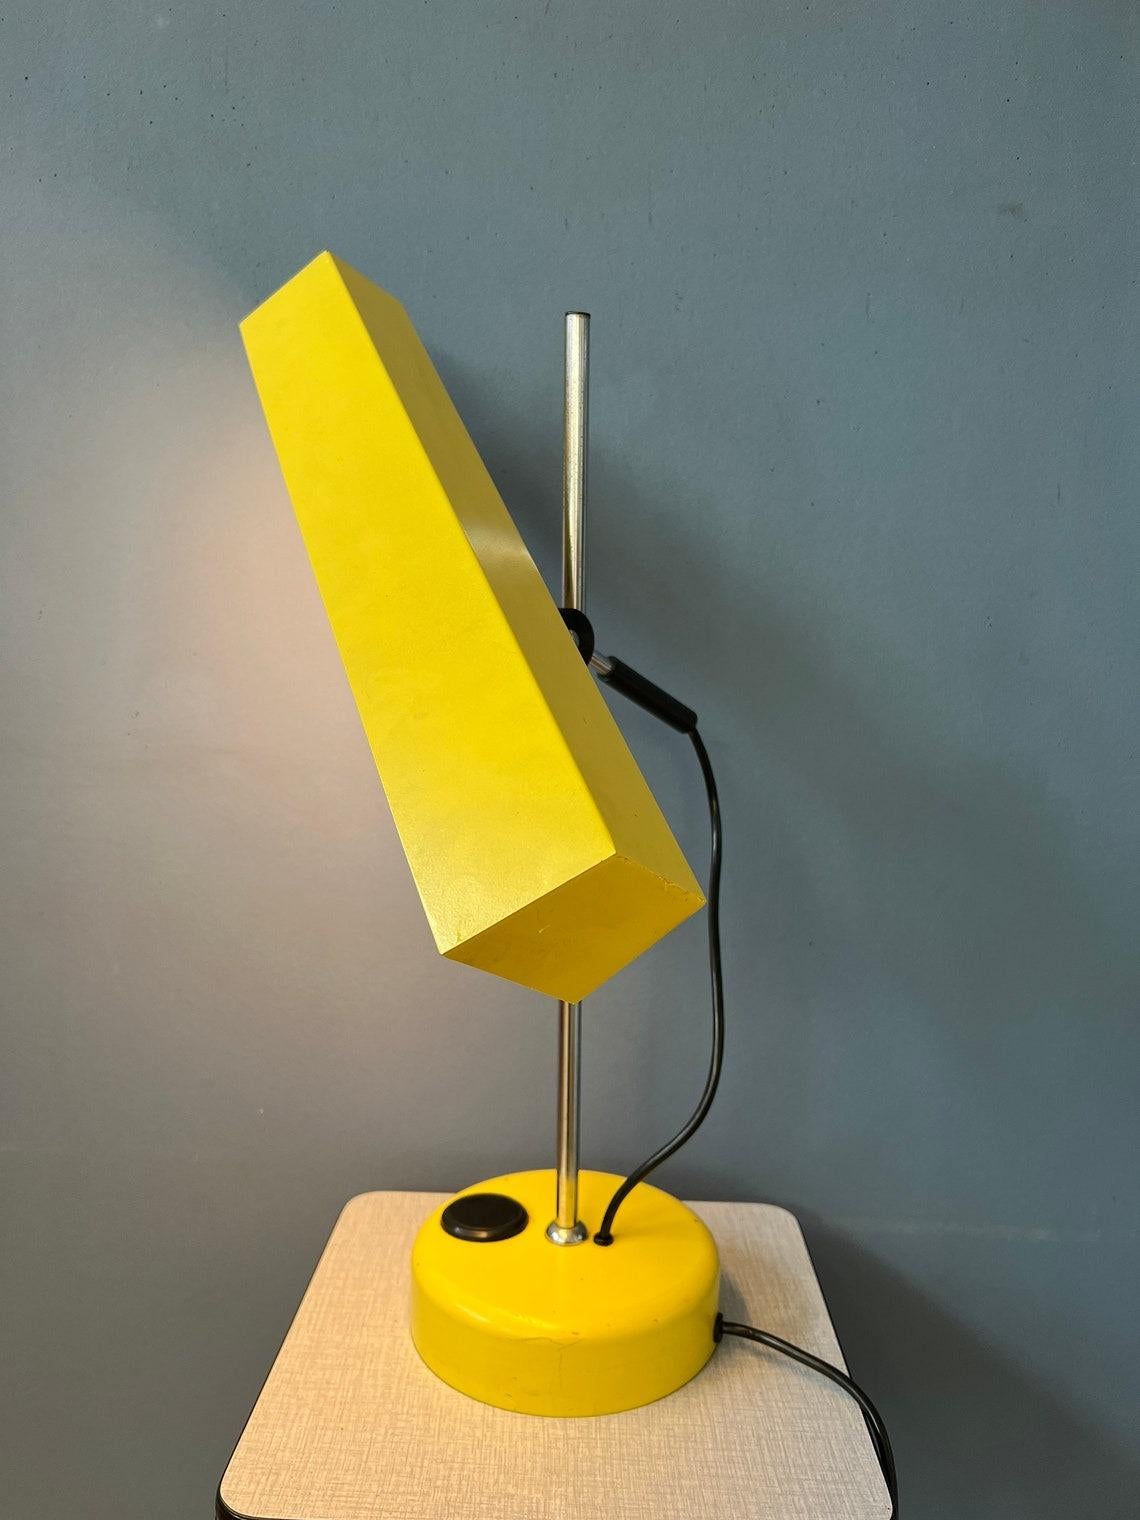 Very special yellow fluorescent space age table lamp. The lamp can be positioned in any way desirable, see pictures. The shade can also move up and down the base. The lamp comes with its fluorescent tube light included.

Additional